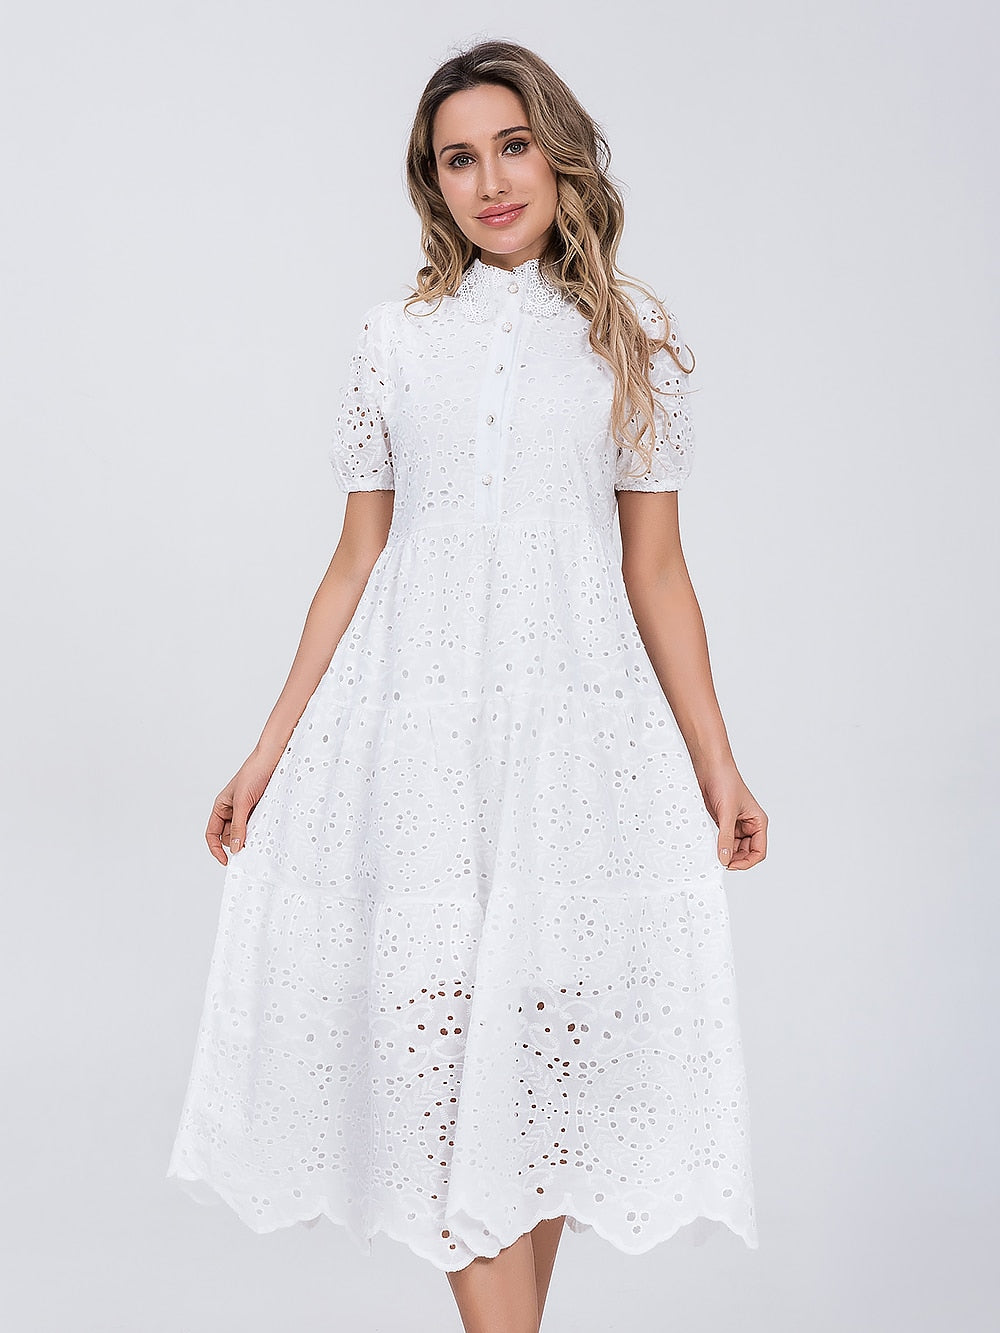 Piper Hollow Out Dress